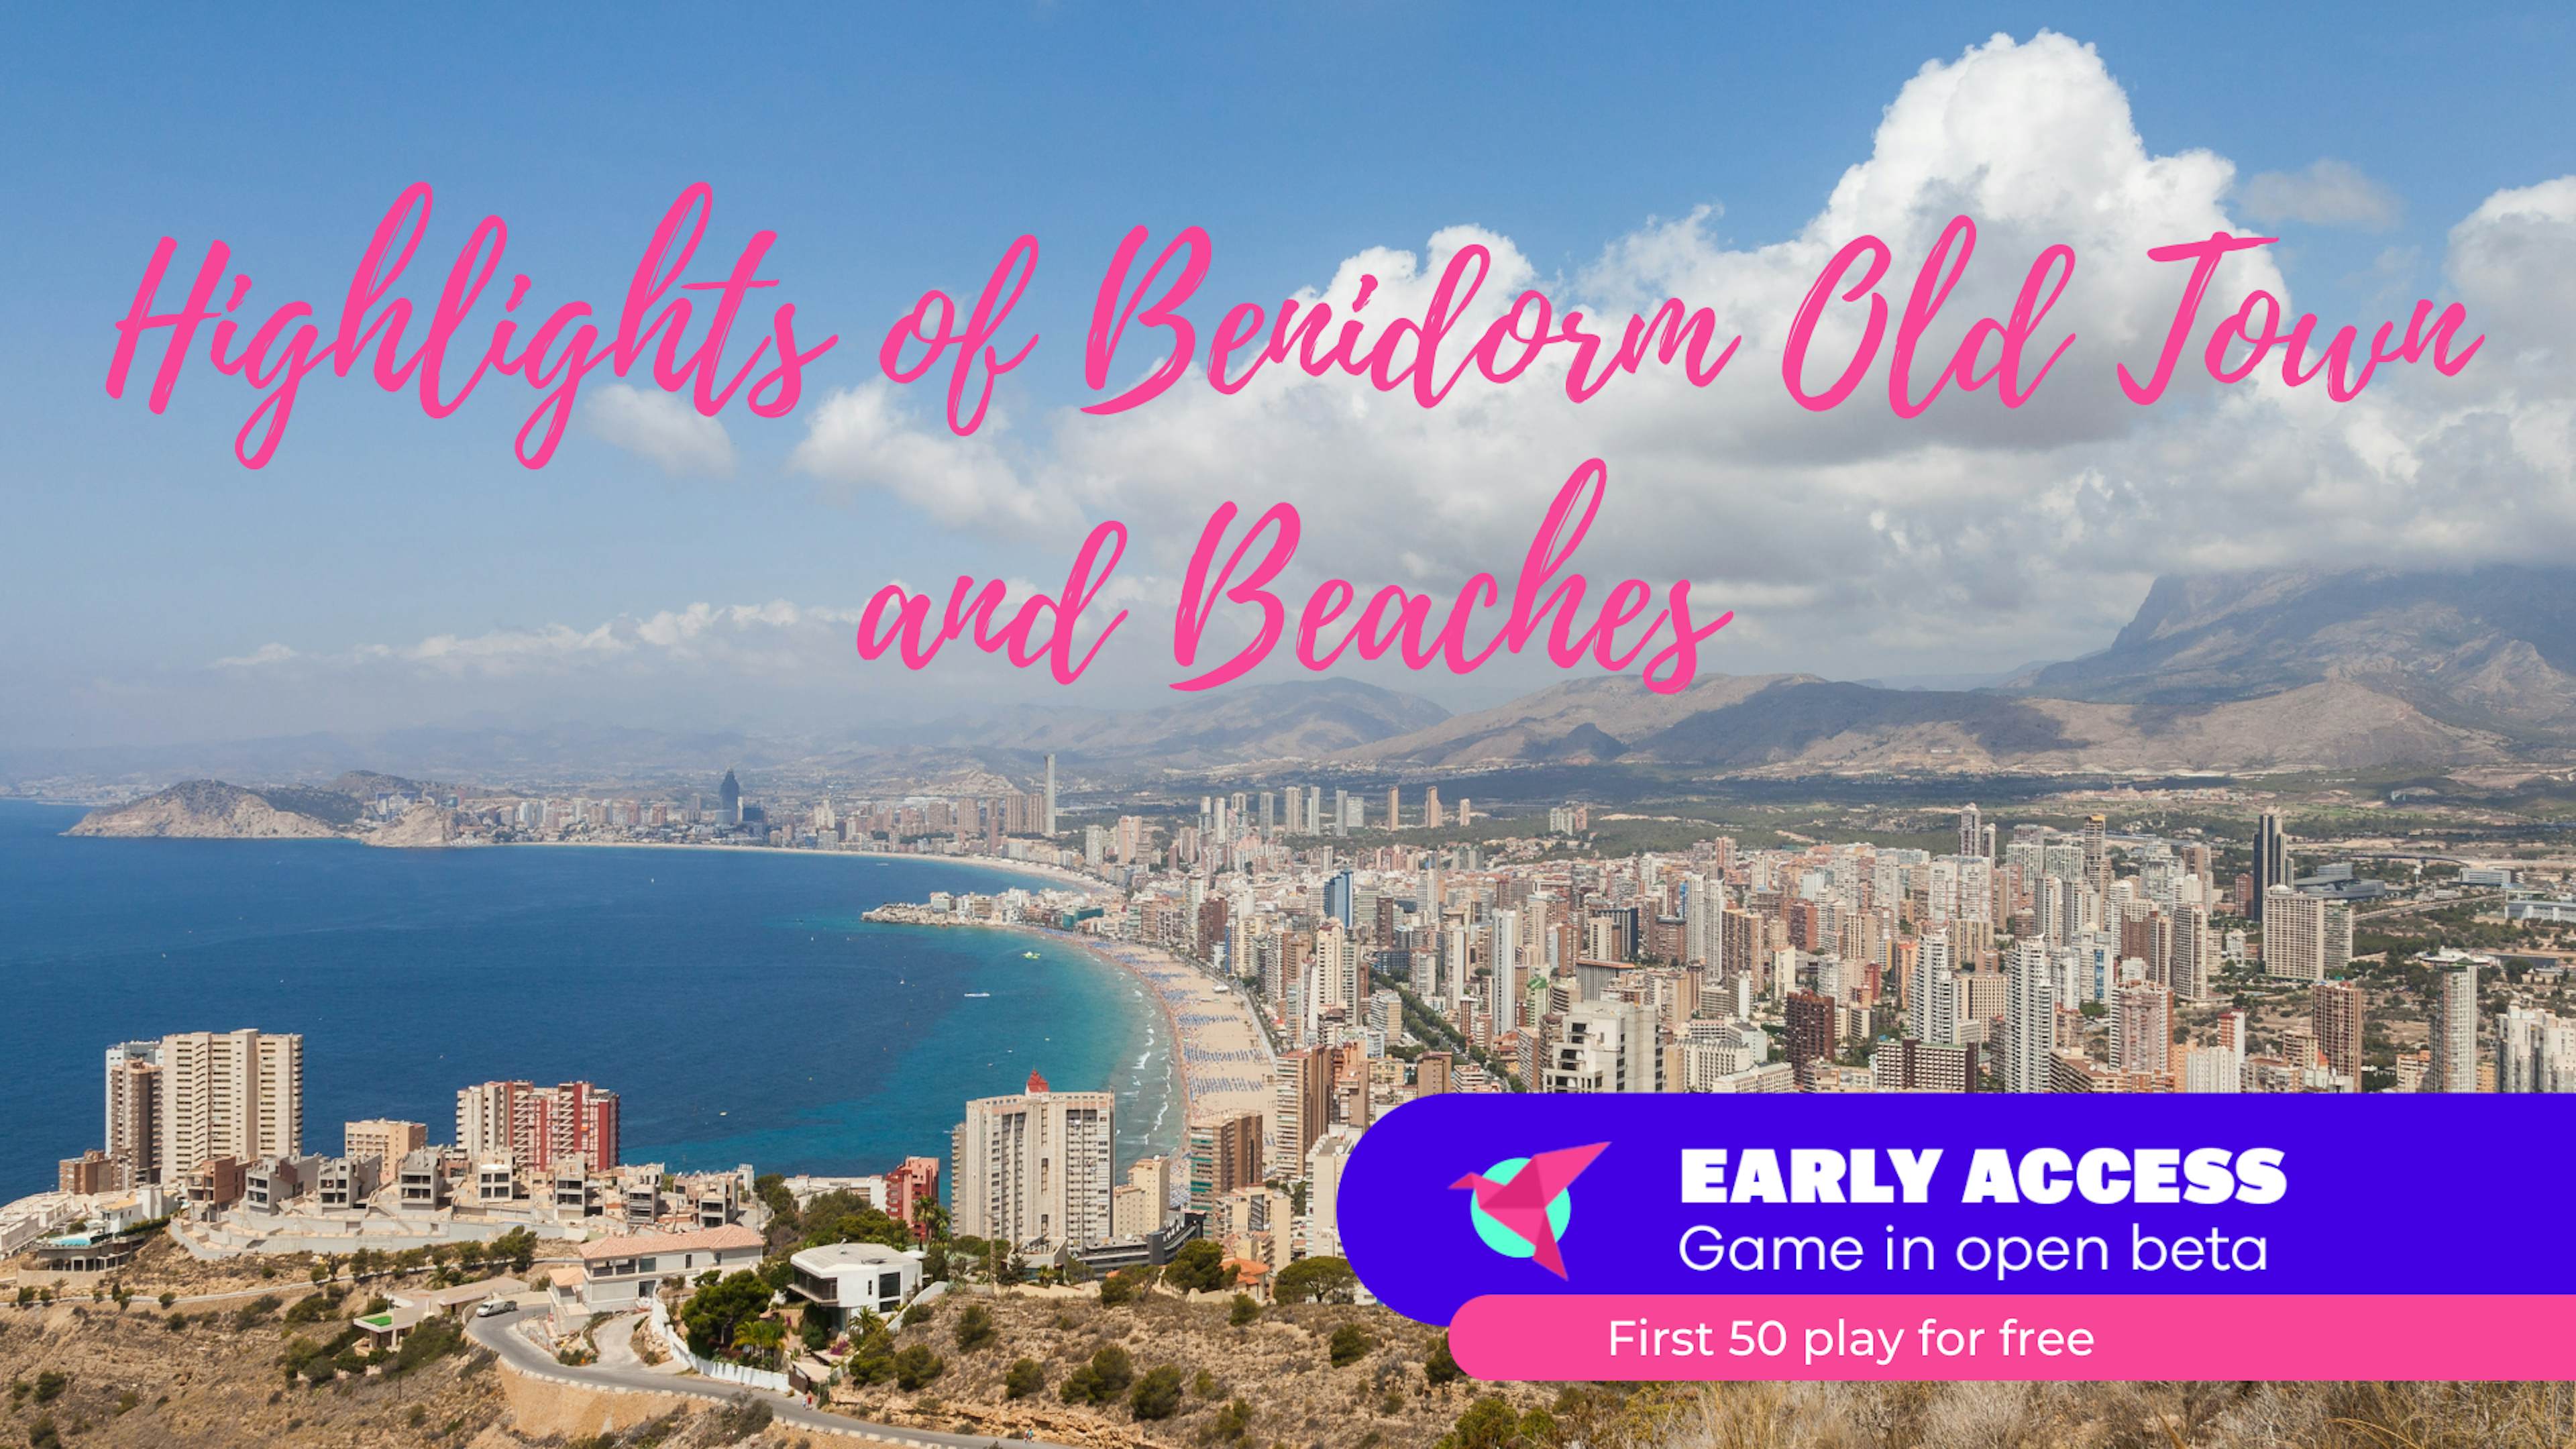 Highlights of Benidorm Old Town and Beaches